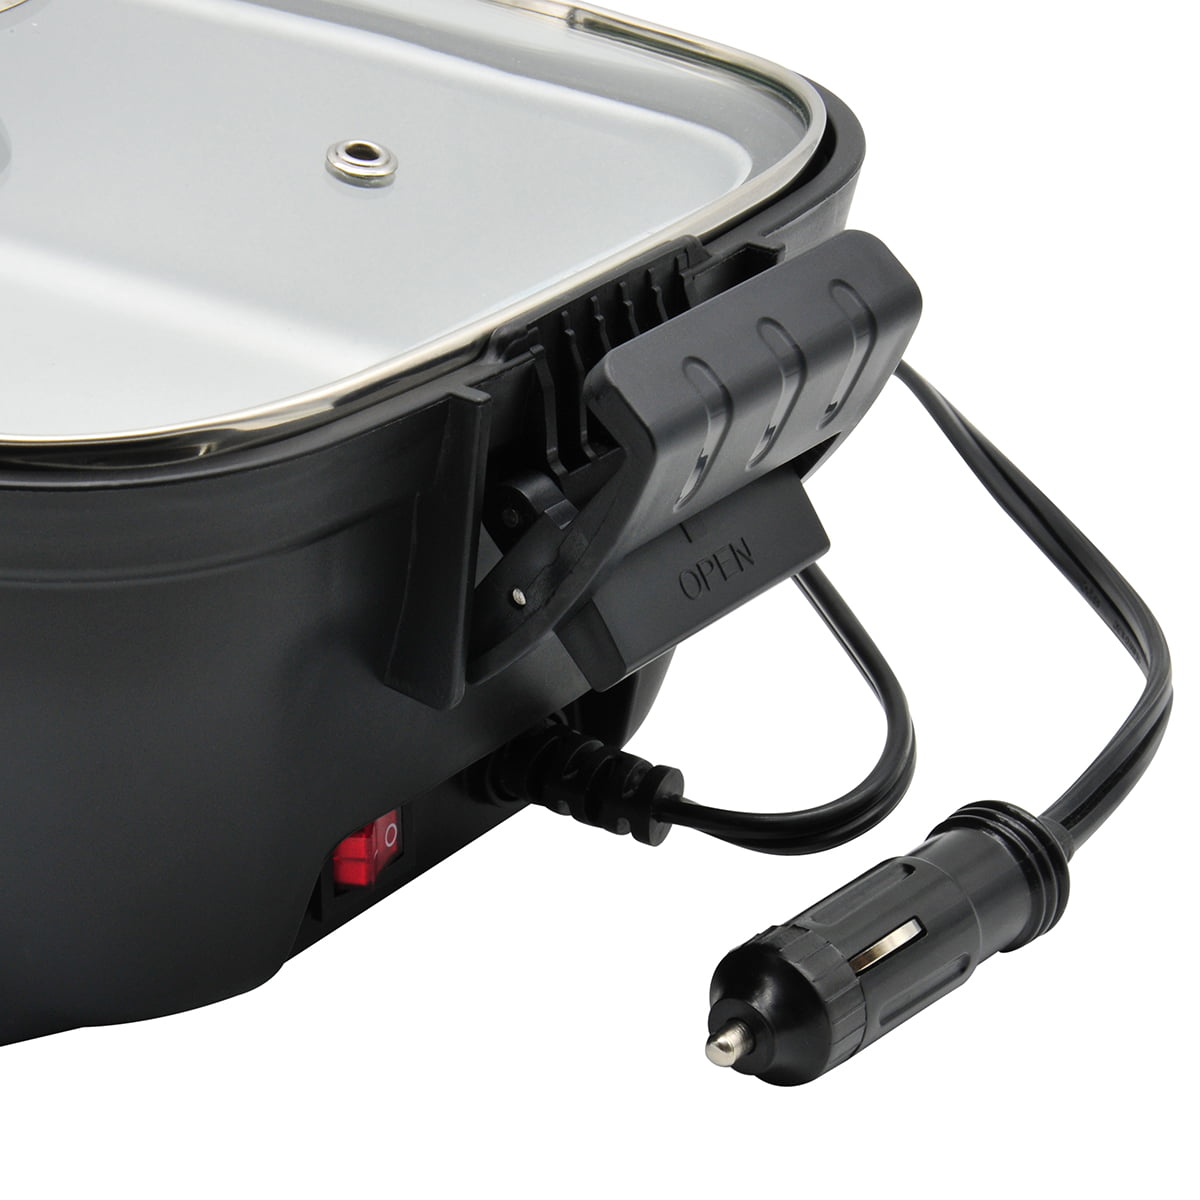  Roadpro RPSP225NS 12-Volt Portable Saucepan with Non-Stick  Surface,Black: Electric Popcorn Poppers: Home & Kitchen